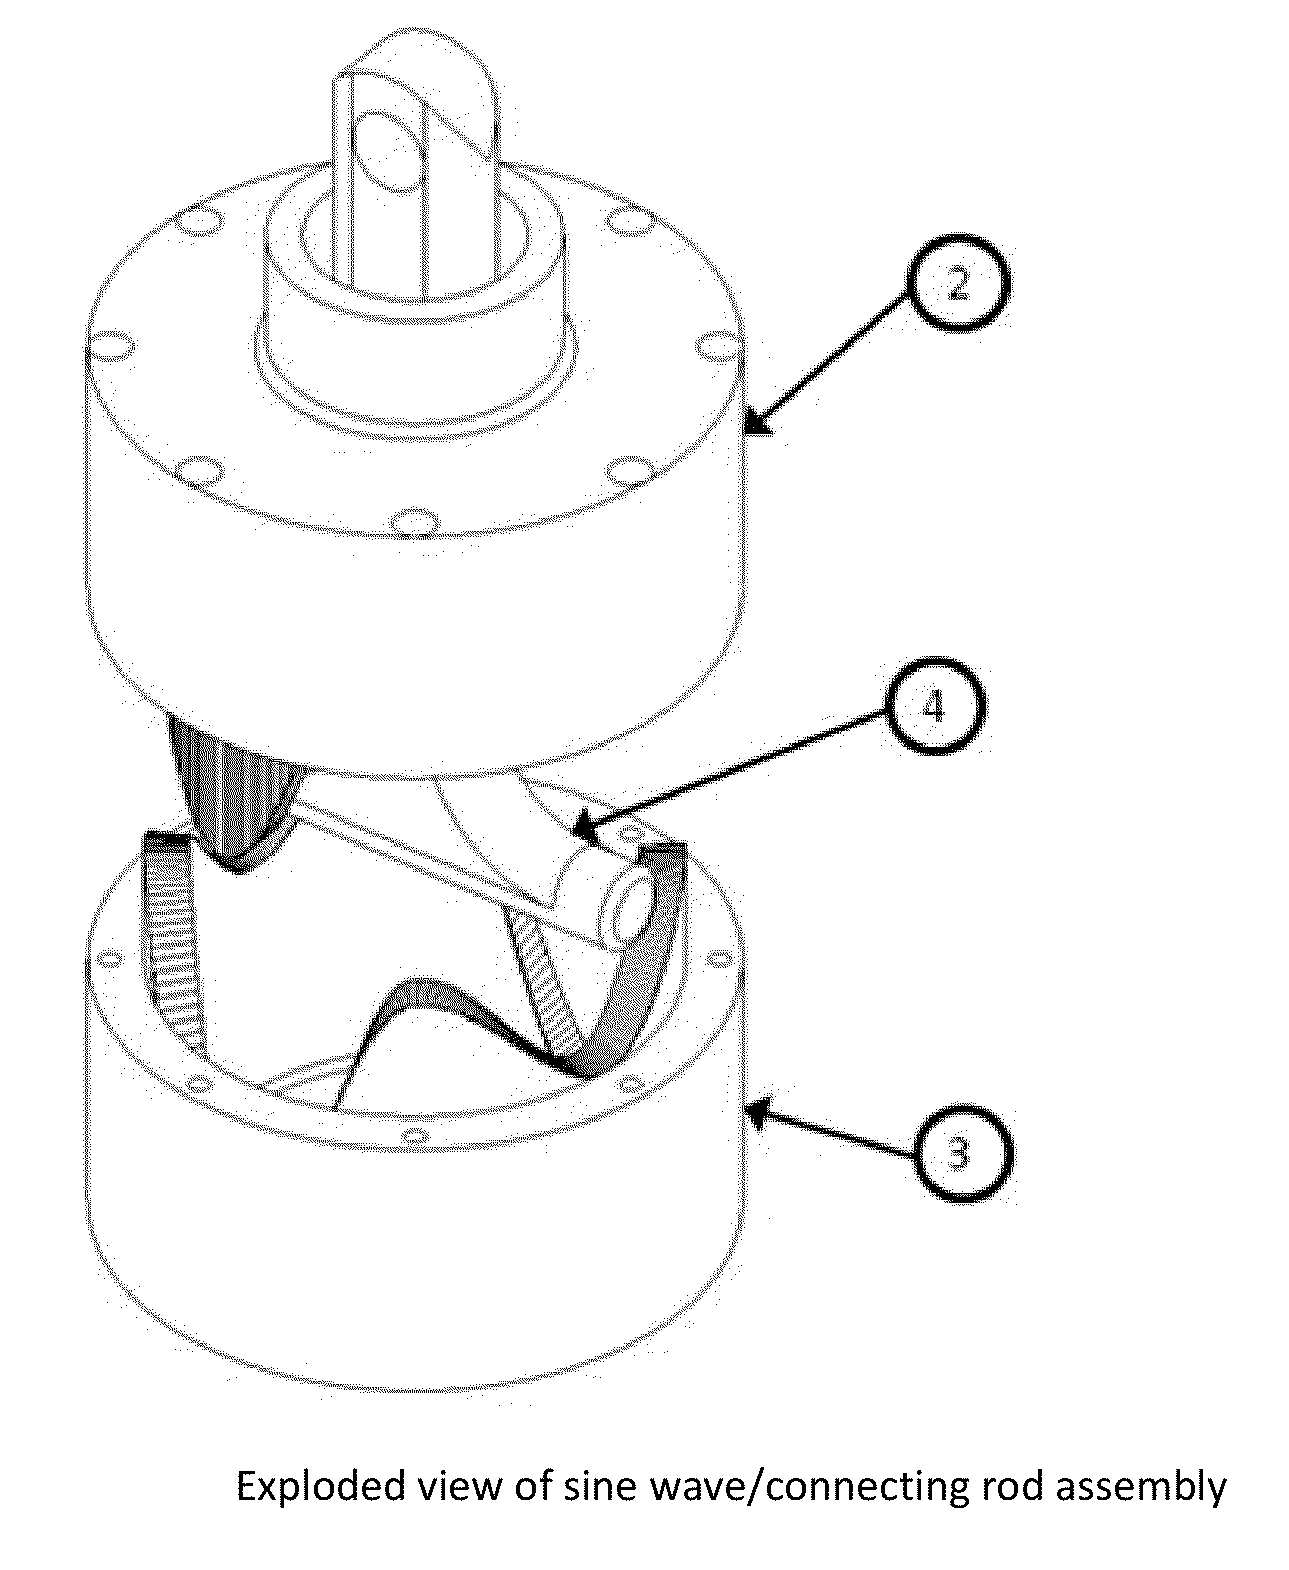 Axial Piston Internal Combustion Engine Using an Atkinson Cycle